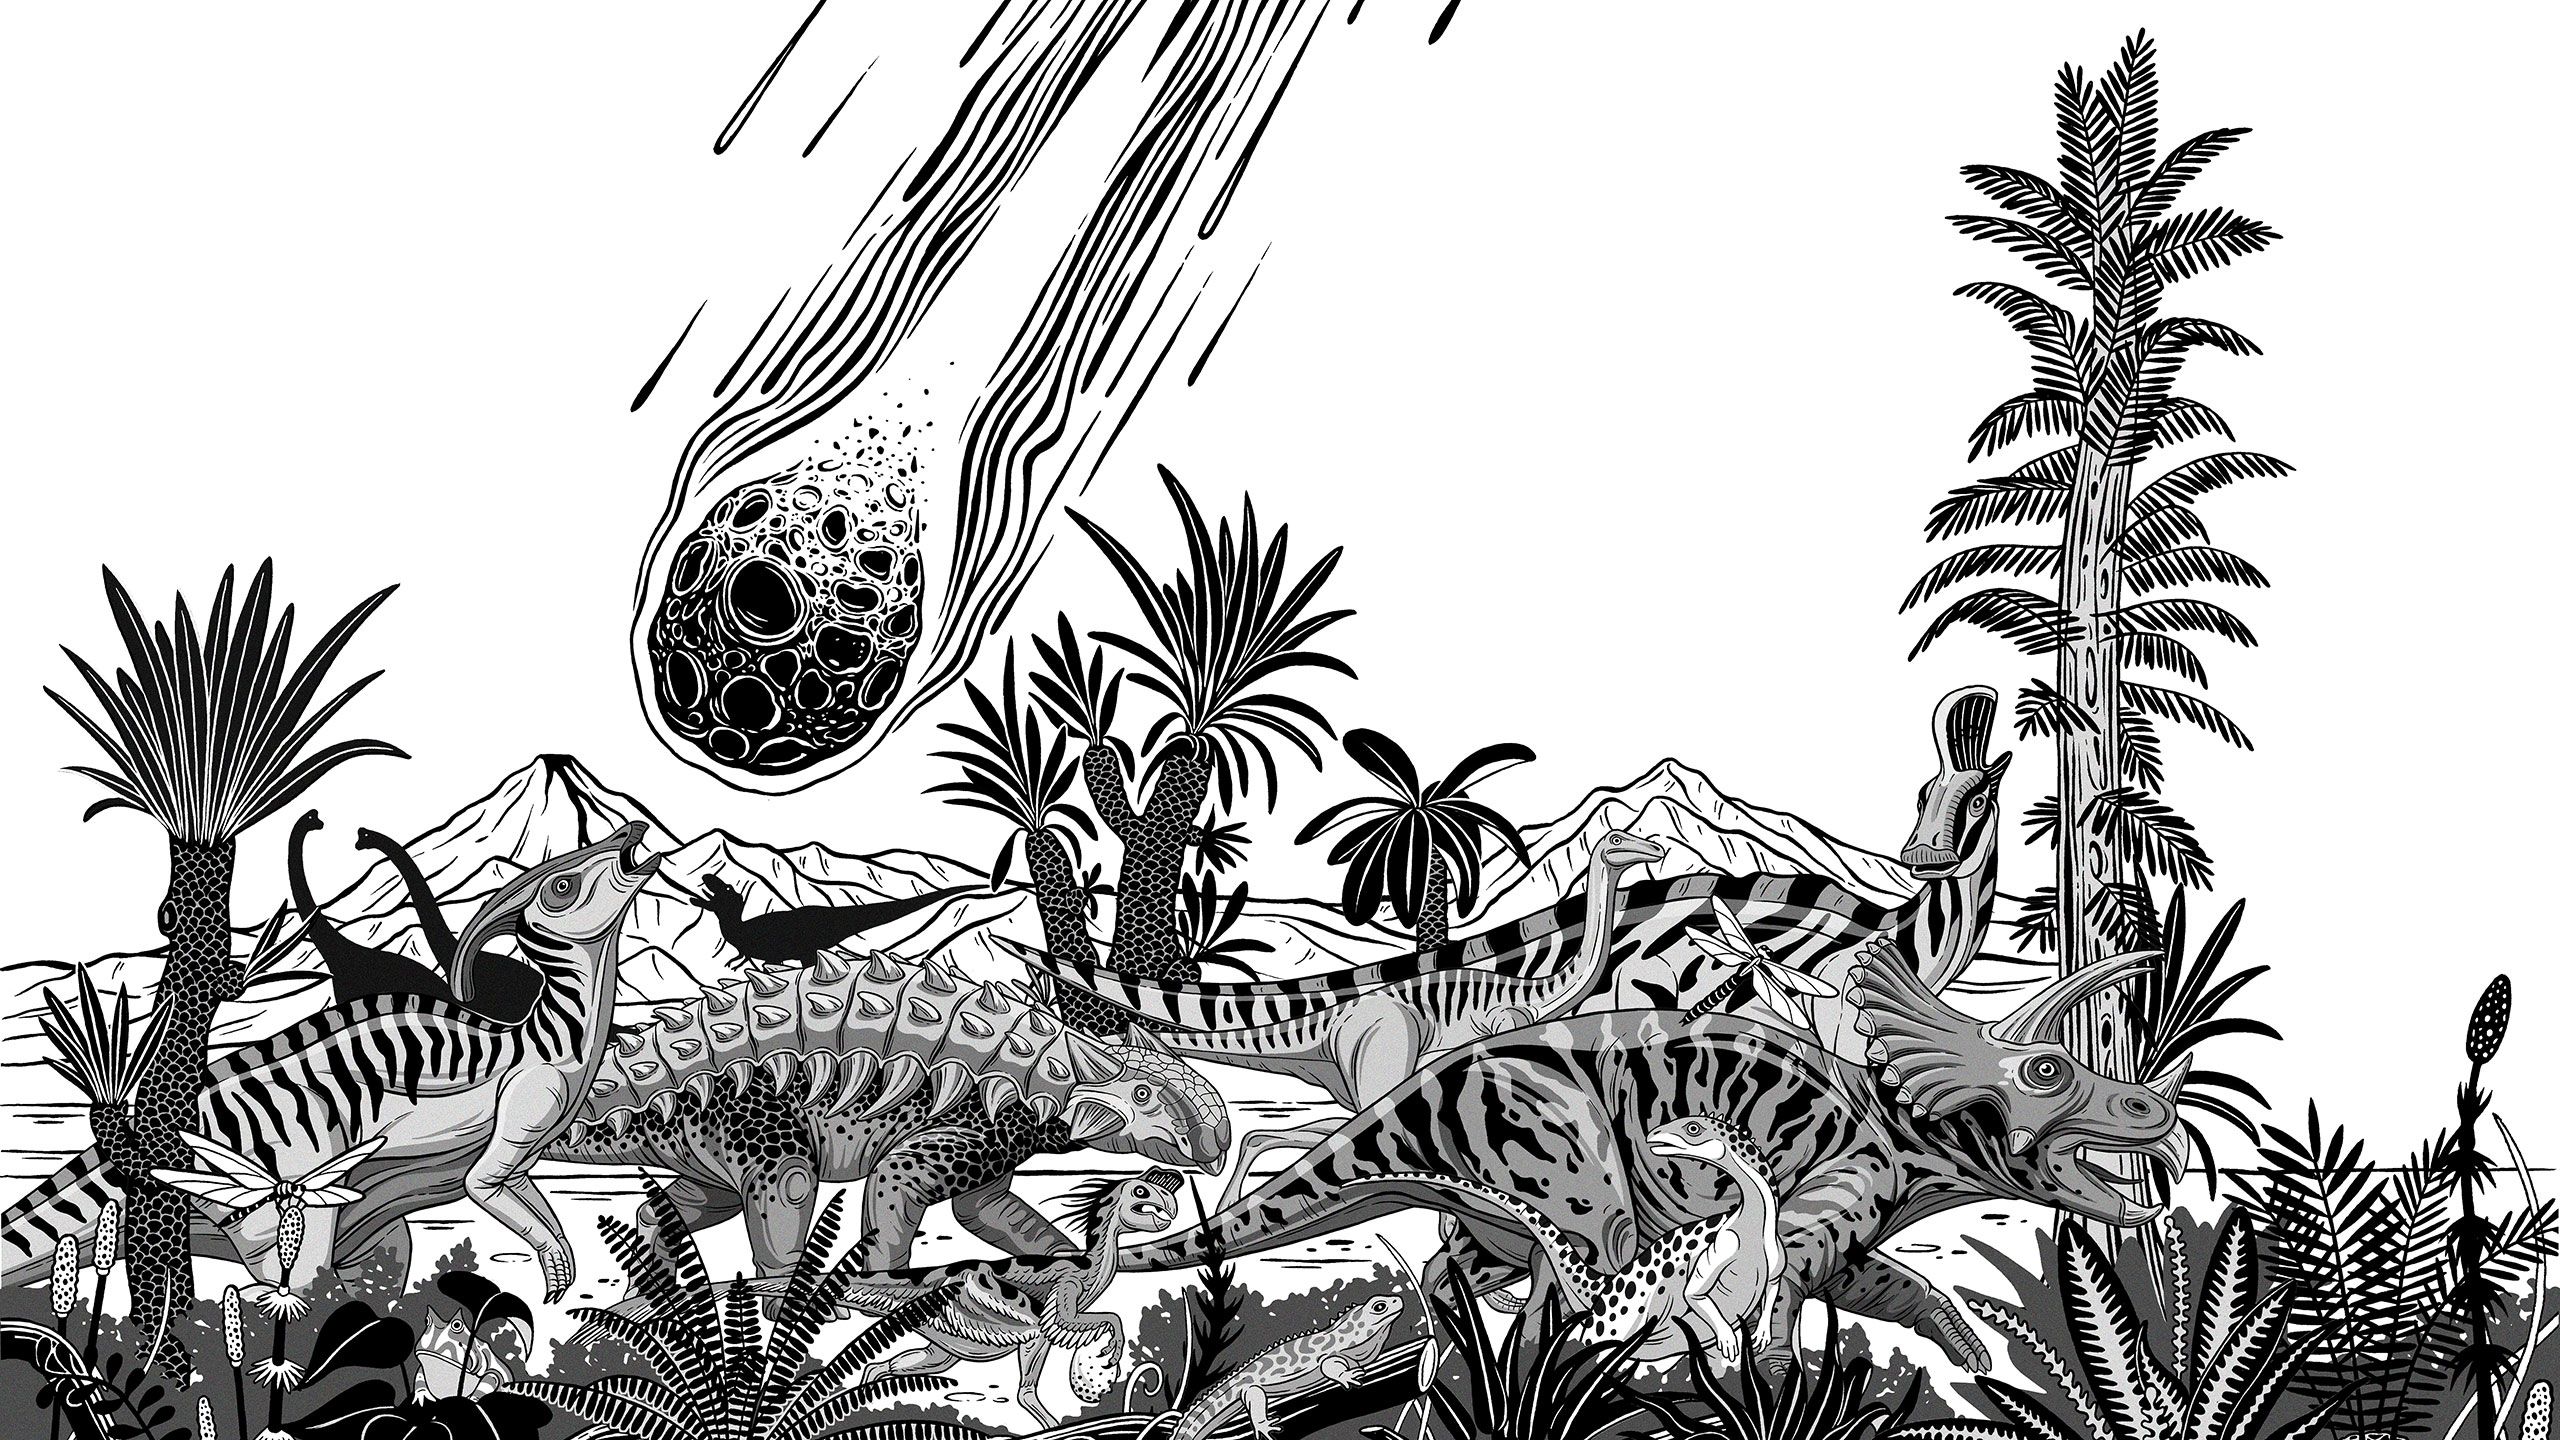 An illustration of a meteor approaching Earth, with a procession of dinosaurs and pre-historic plants and trees in the foreground